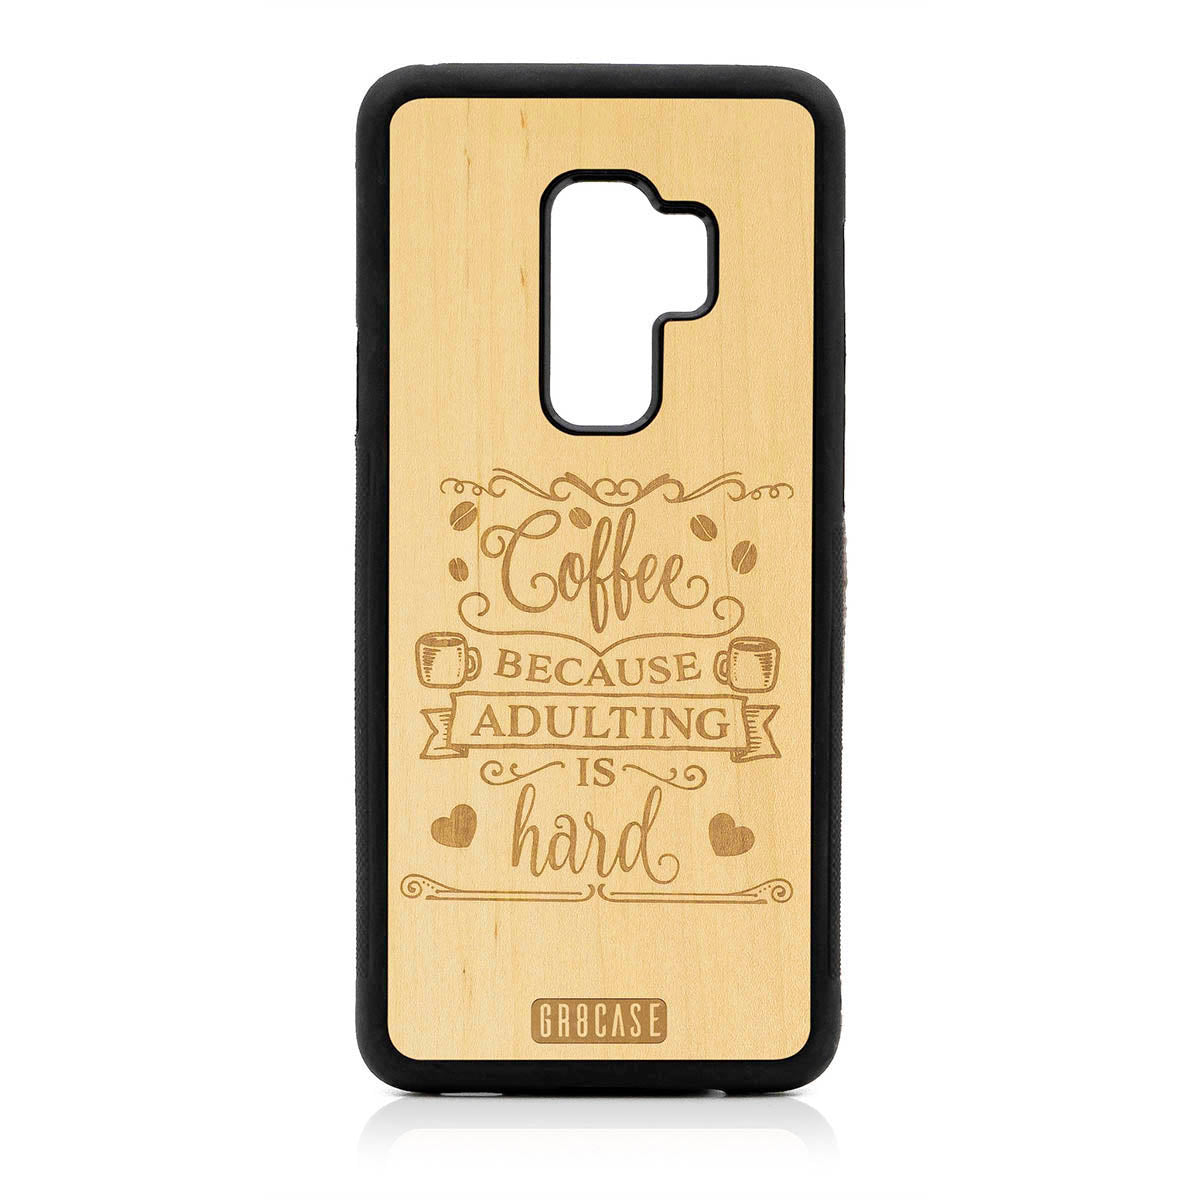 Coffee Because Adulting Is Hard Design Wood Case For Samsung Galaxy S9 Plus